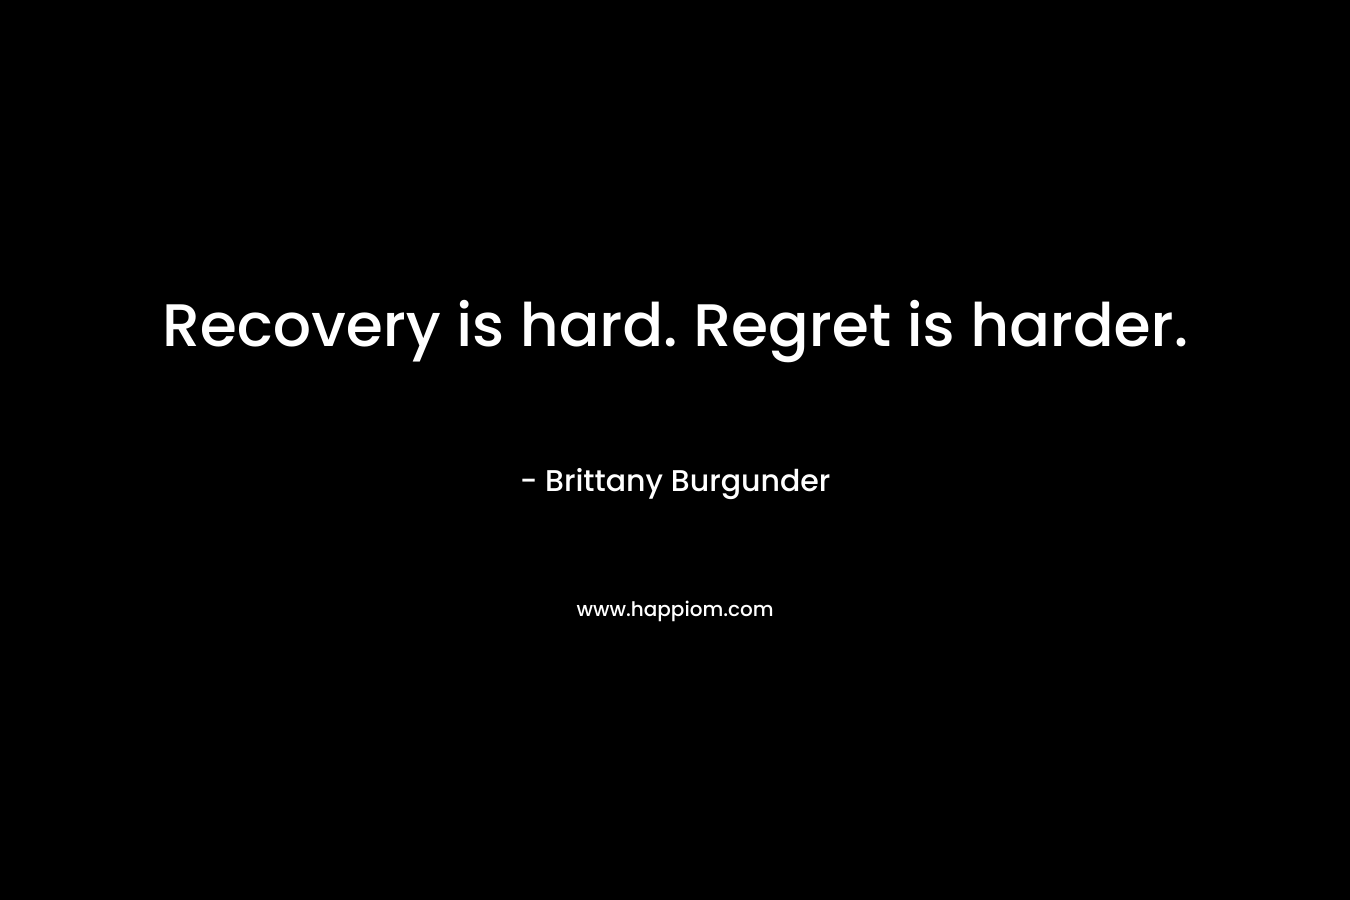 Recovery is hard. Regret is harder.